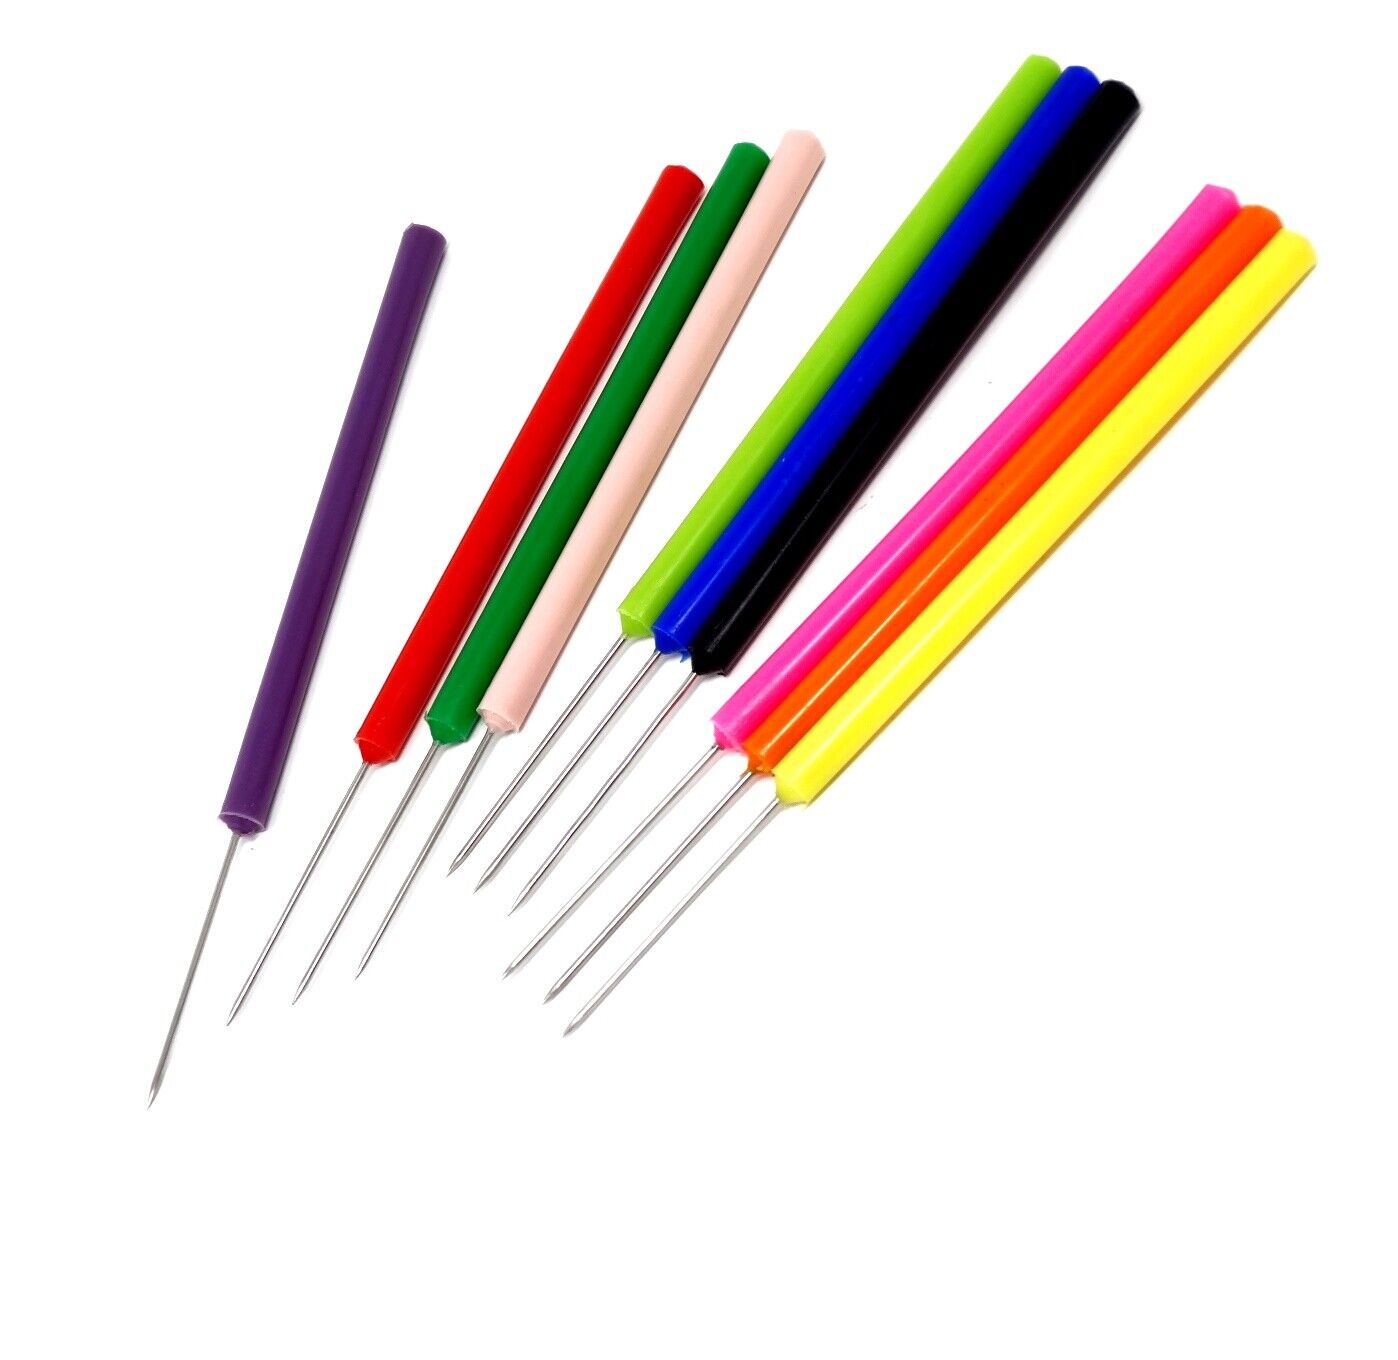 Assorted Multicolor Lab Dissecting Teasing Needles with Plastic Handles 10Pk A2Z SCILAB Does Not Apply